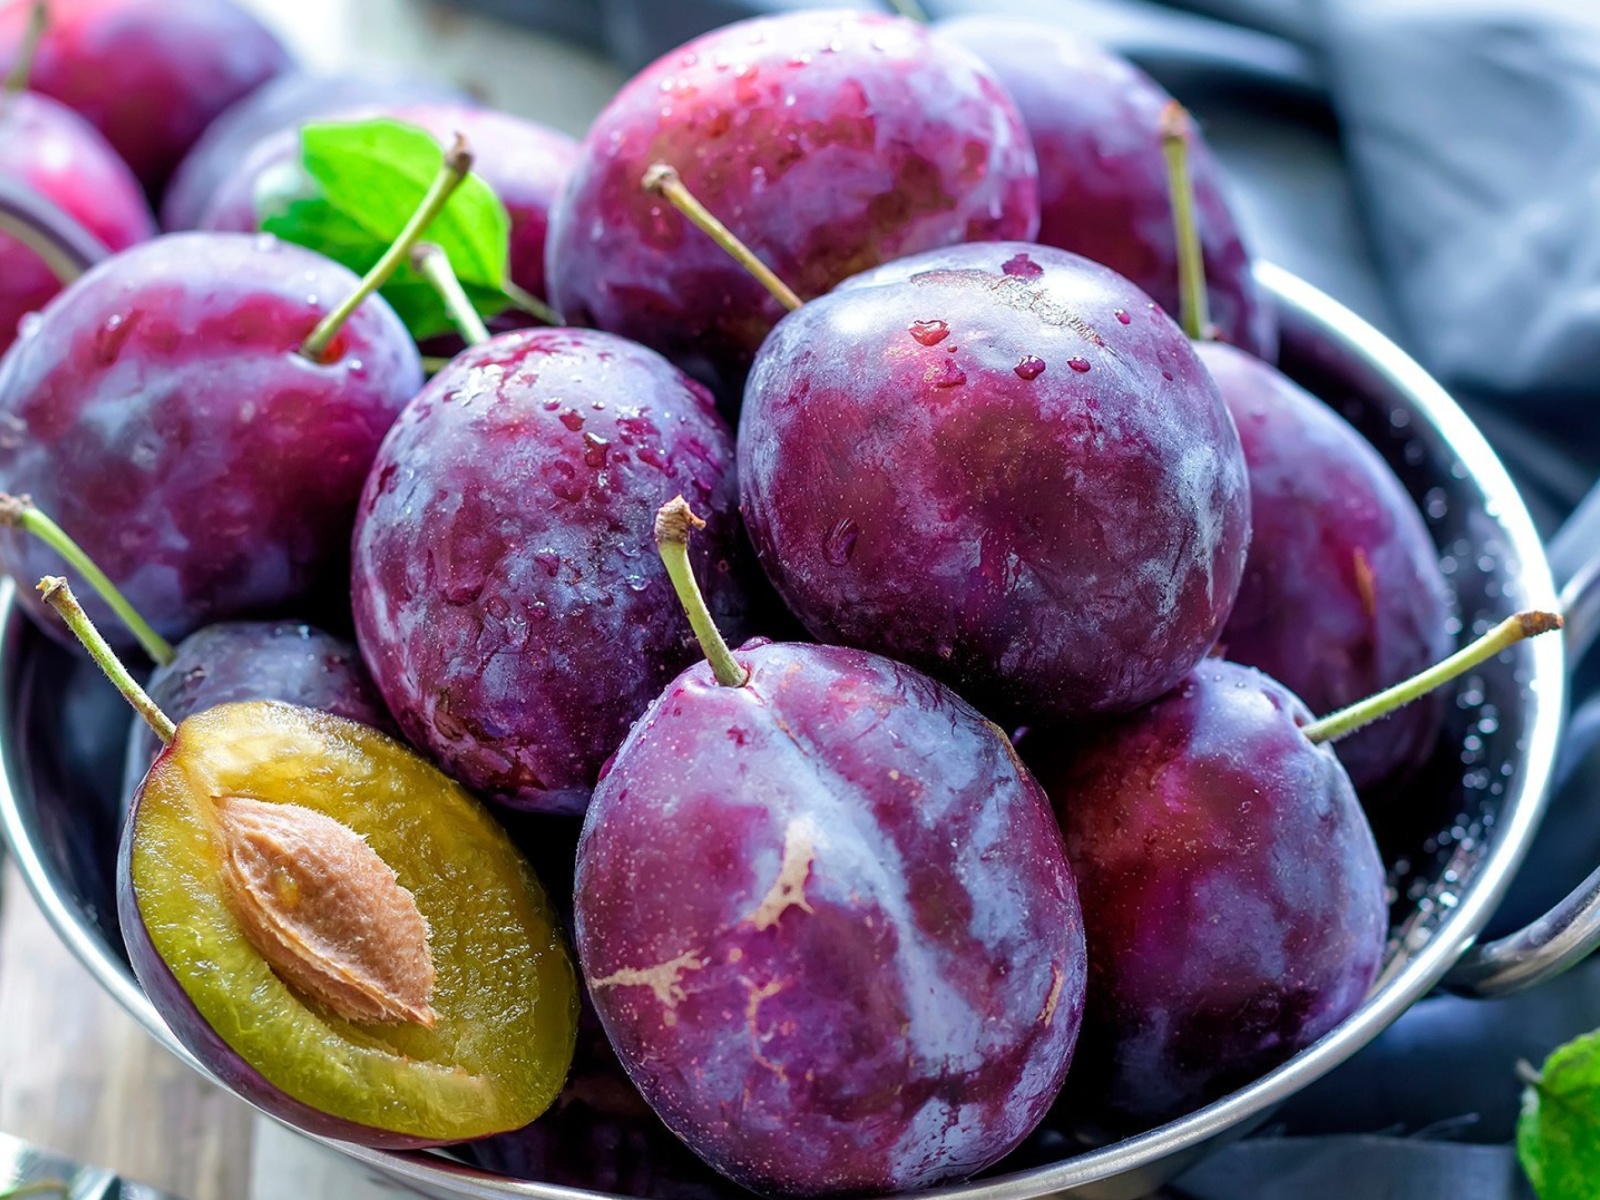 Das Plums with Vitamins Wallpaper 1600x1200